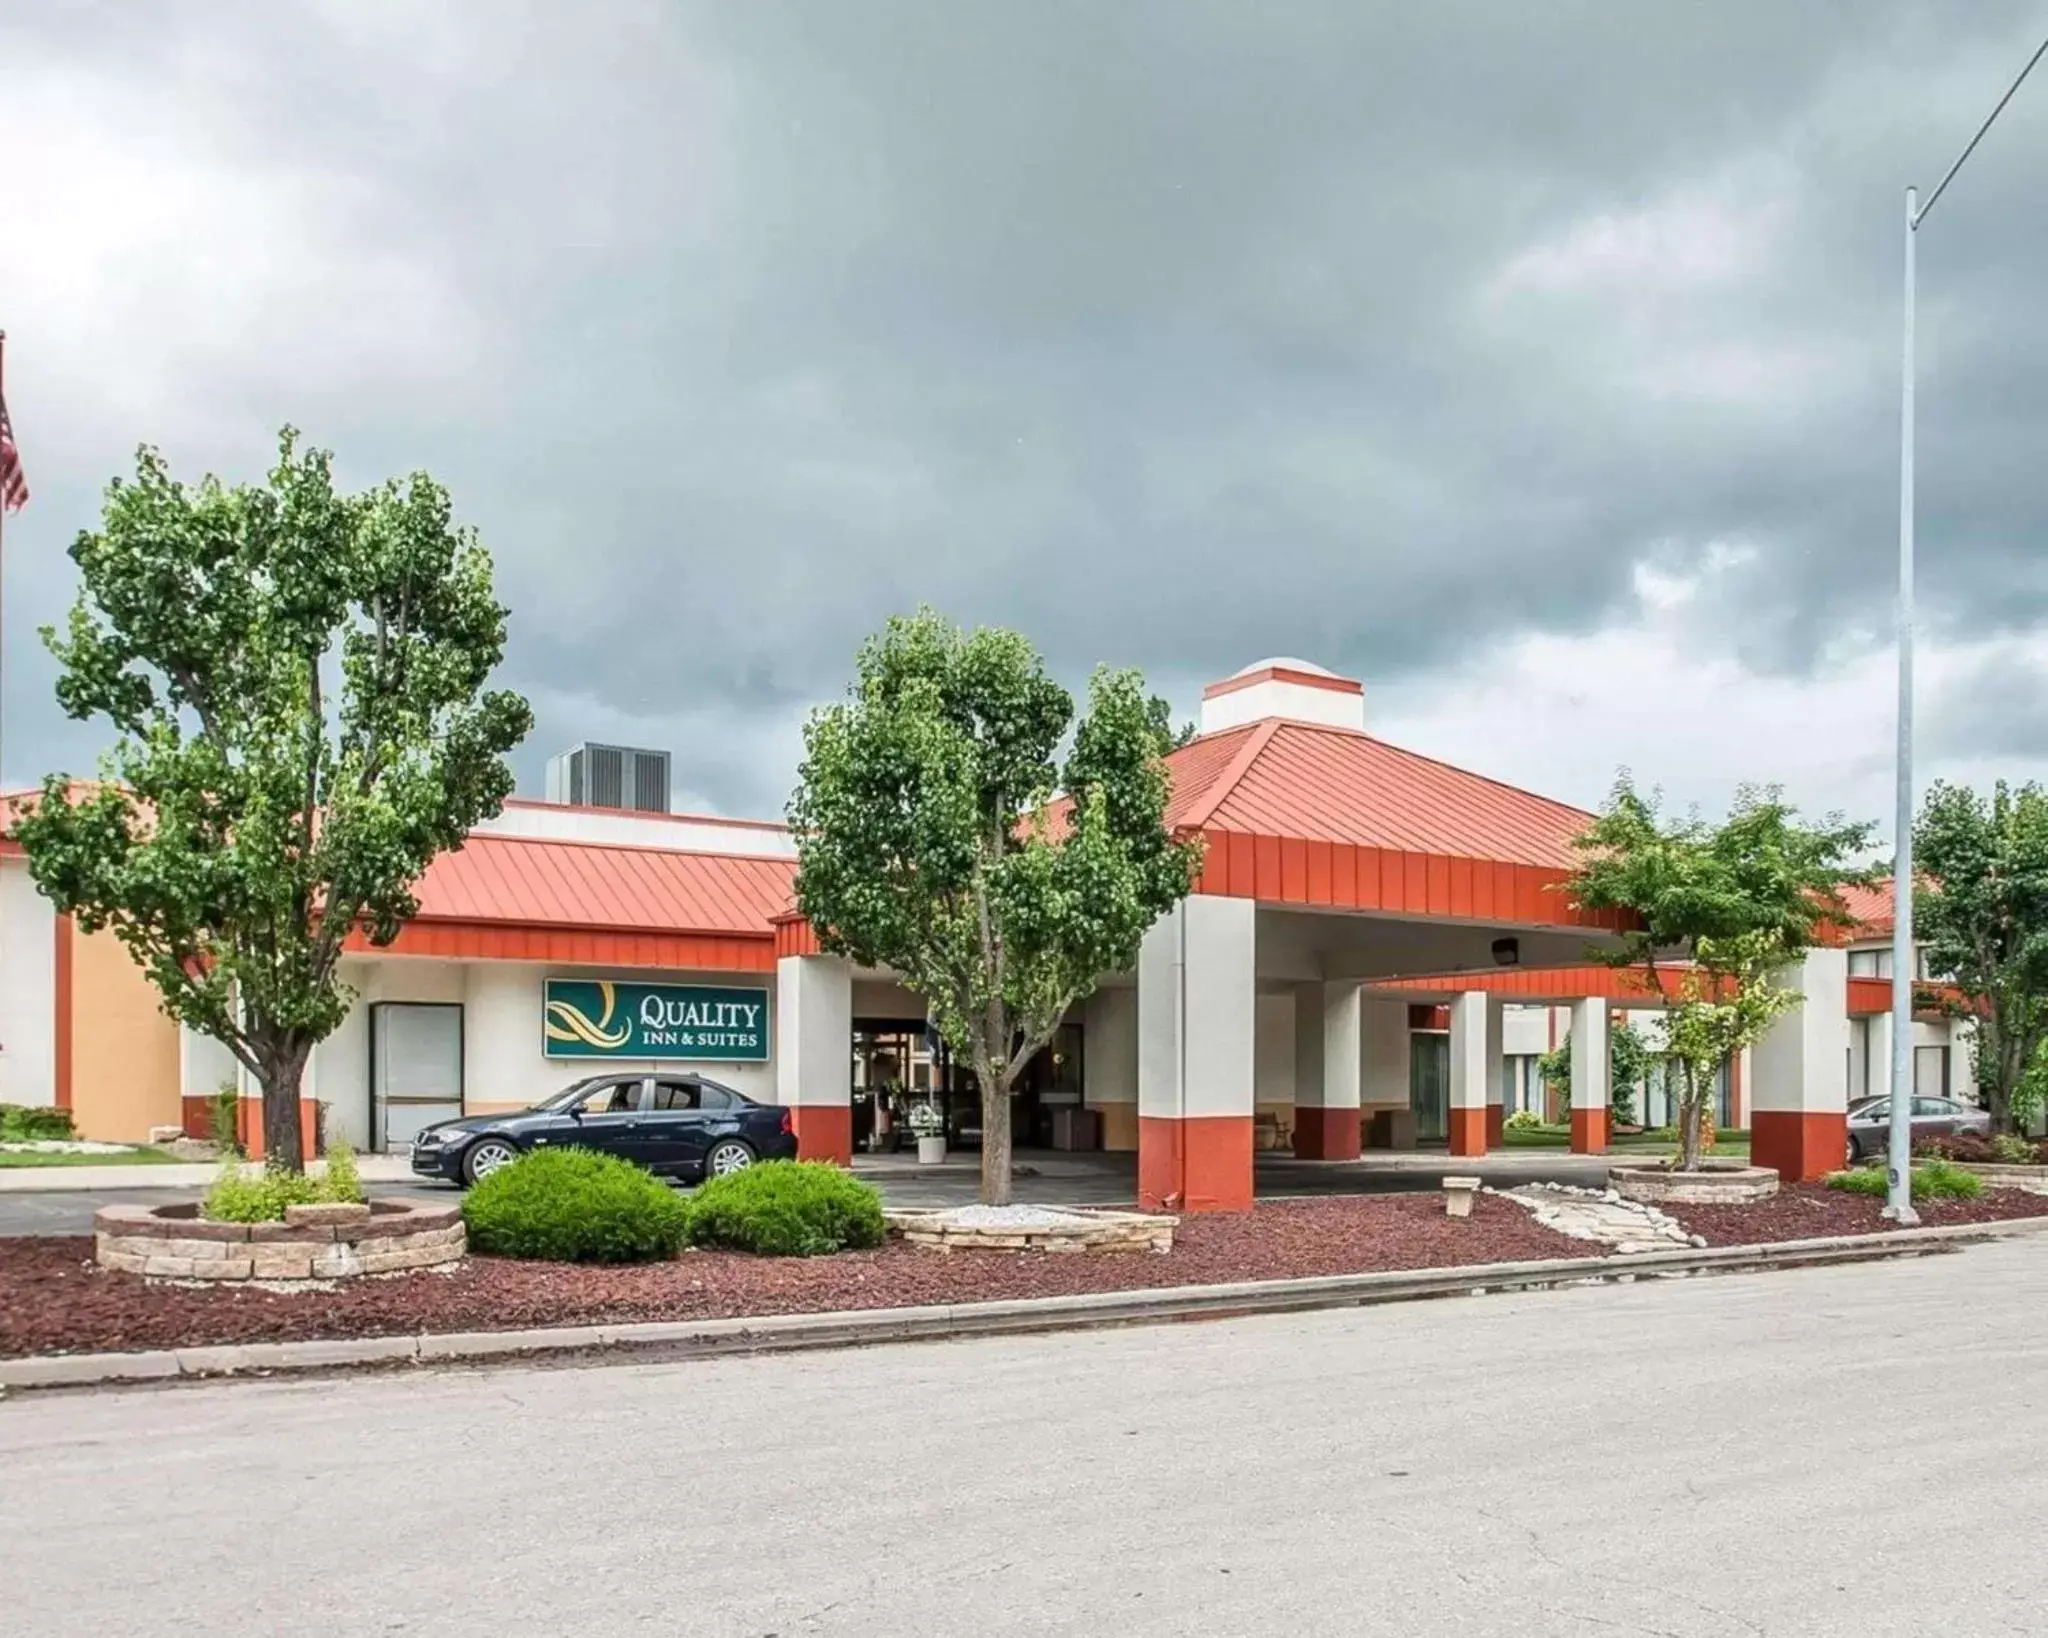 Property Building in Quality Inn & Suites Kansas City I-435N Near Sports Complex